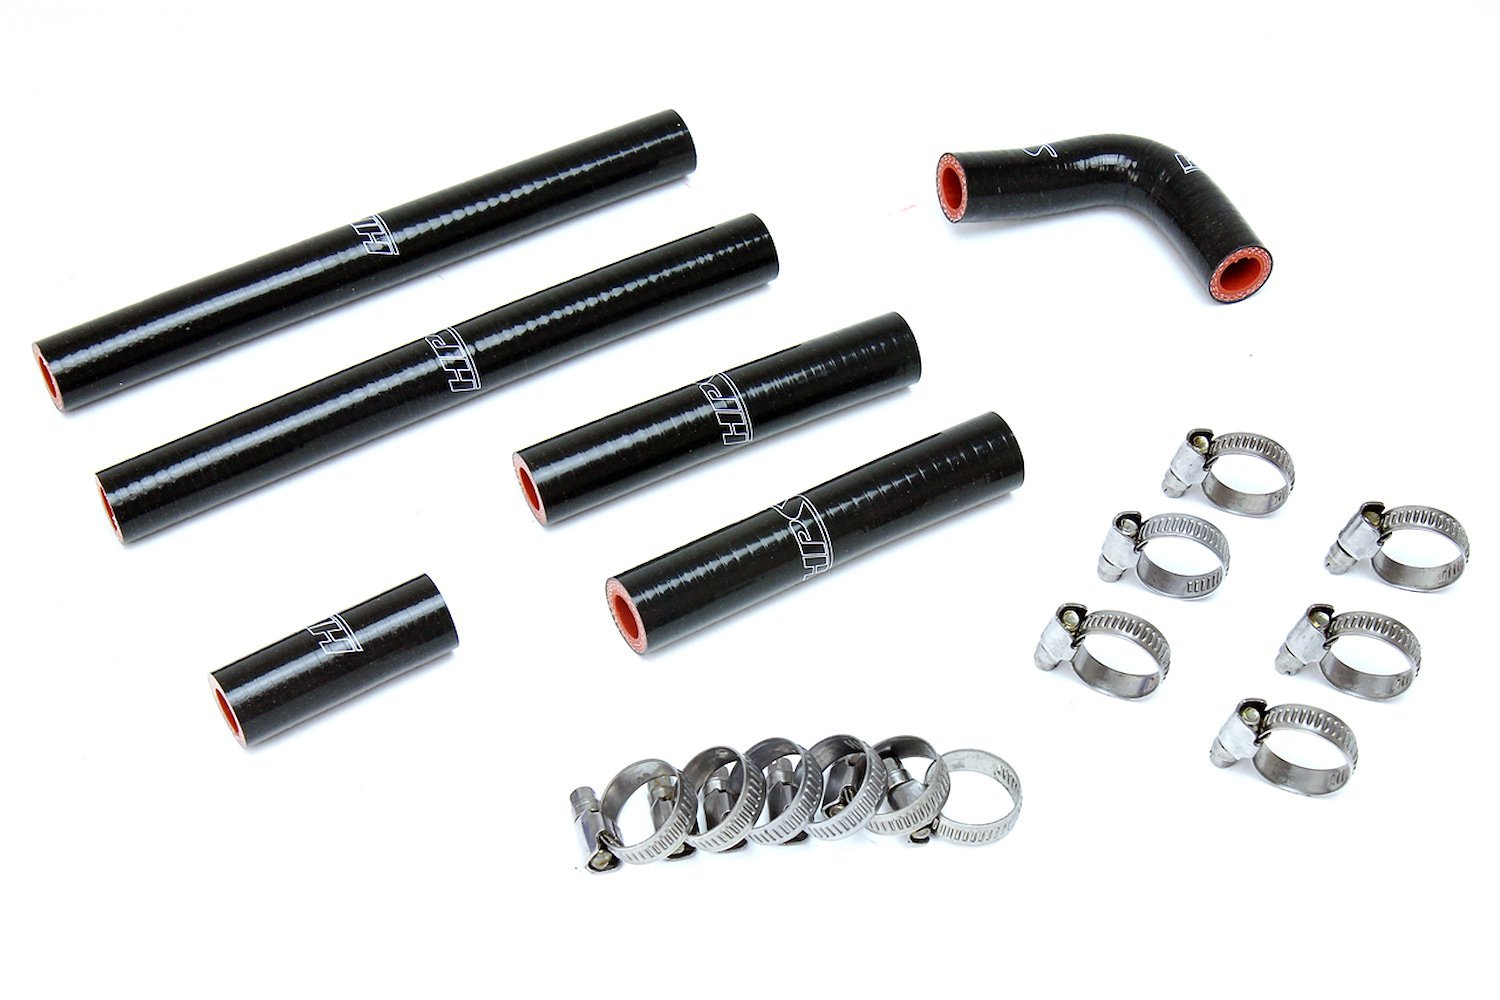 57-1638-BLK Heater Hose Kit, High-Temp 3-Ply Reinforced Silicone, Replace OEM Rubber Heater Coolant Hoses